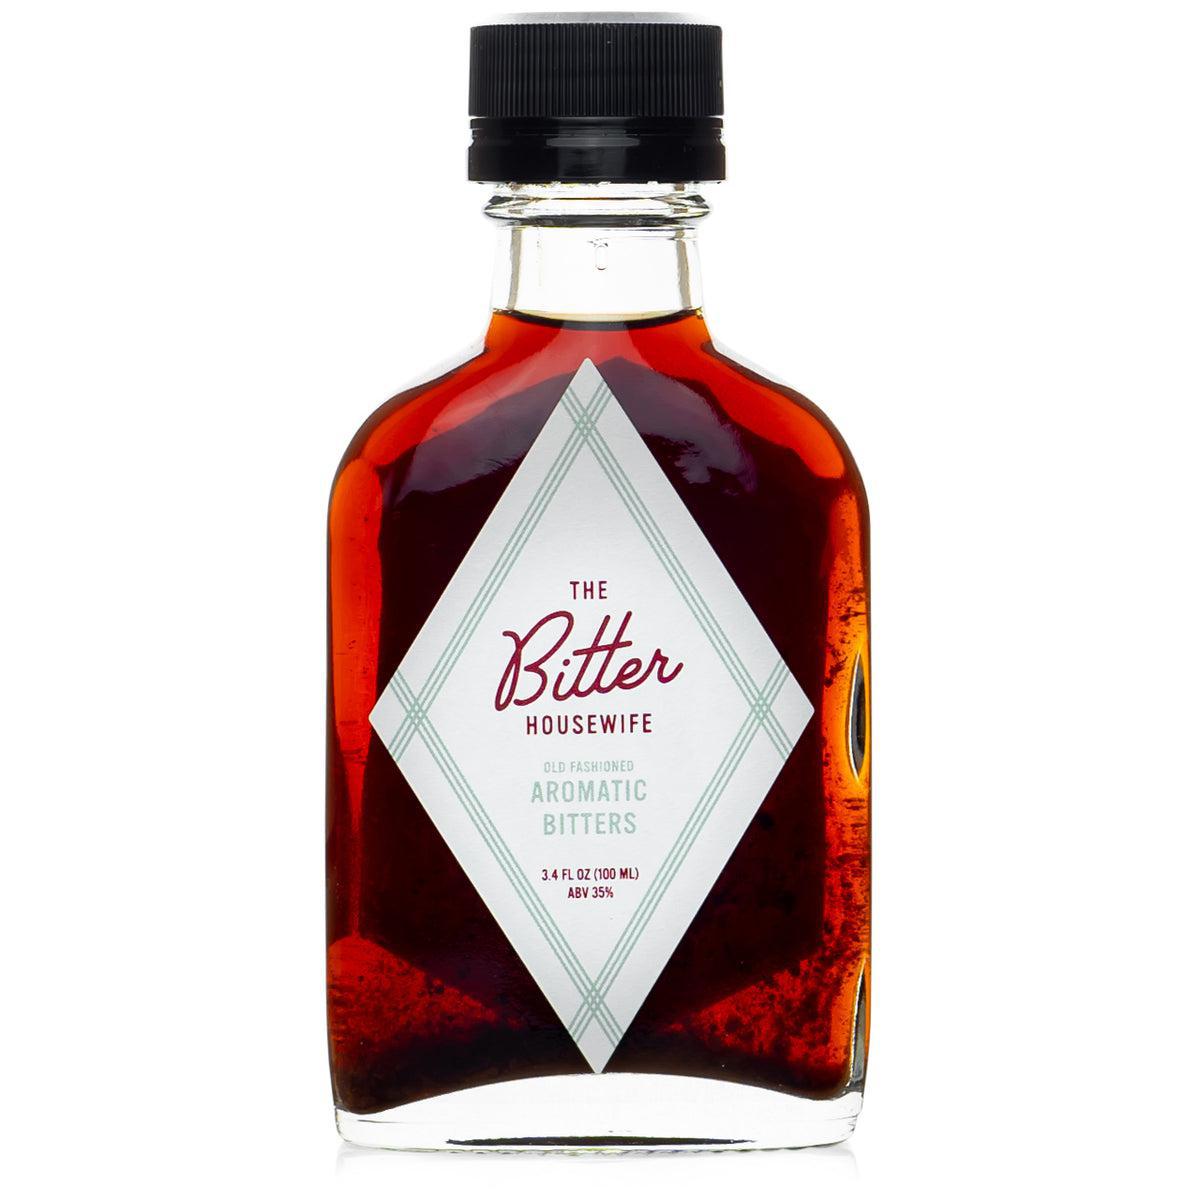 The Bitter Housewife - 'Old Fashioned' Aromatic Bitters (100ML)